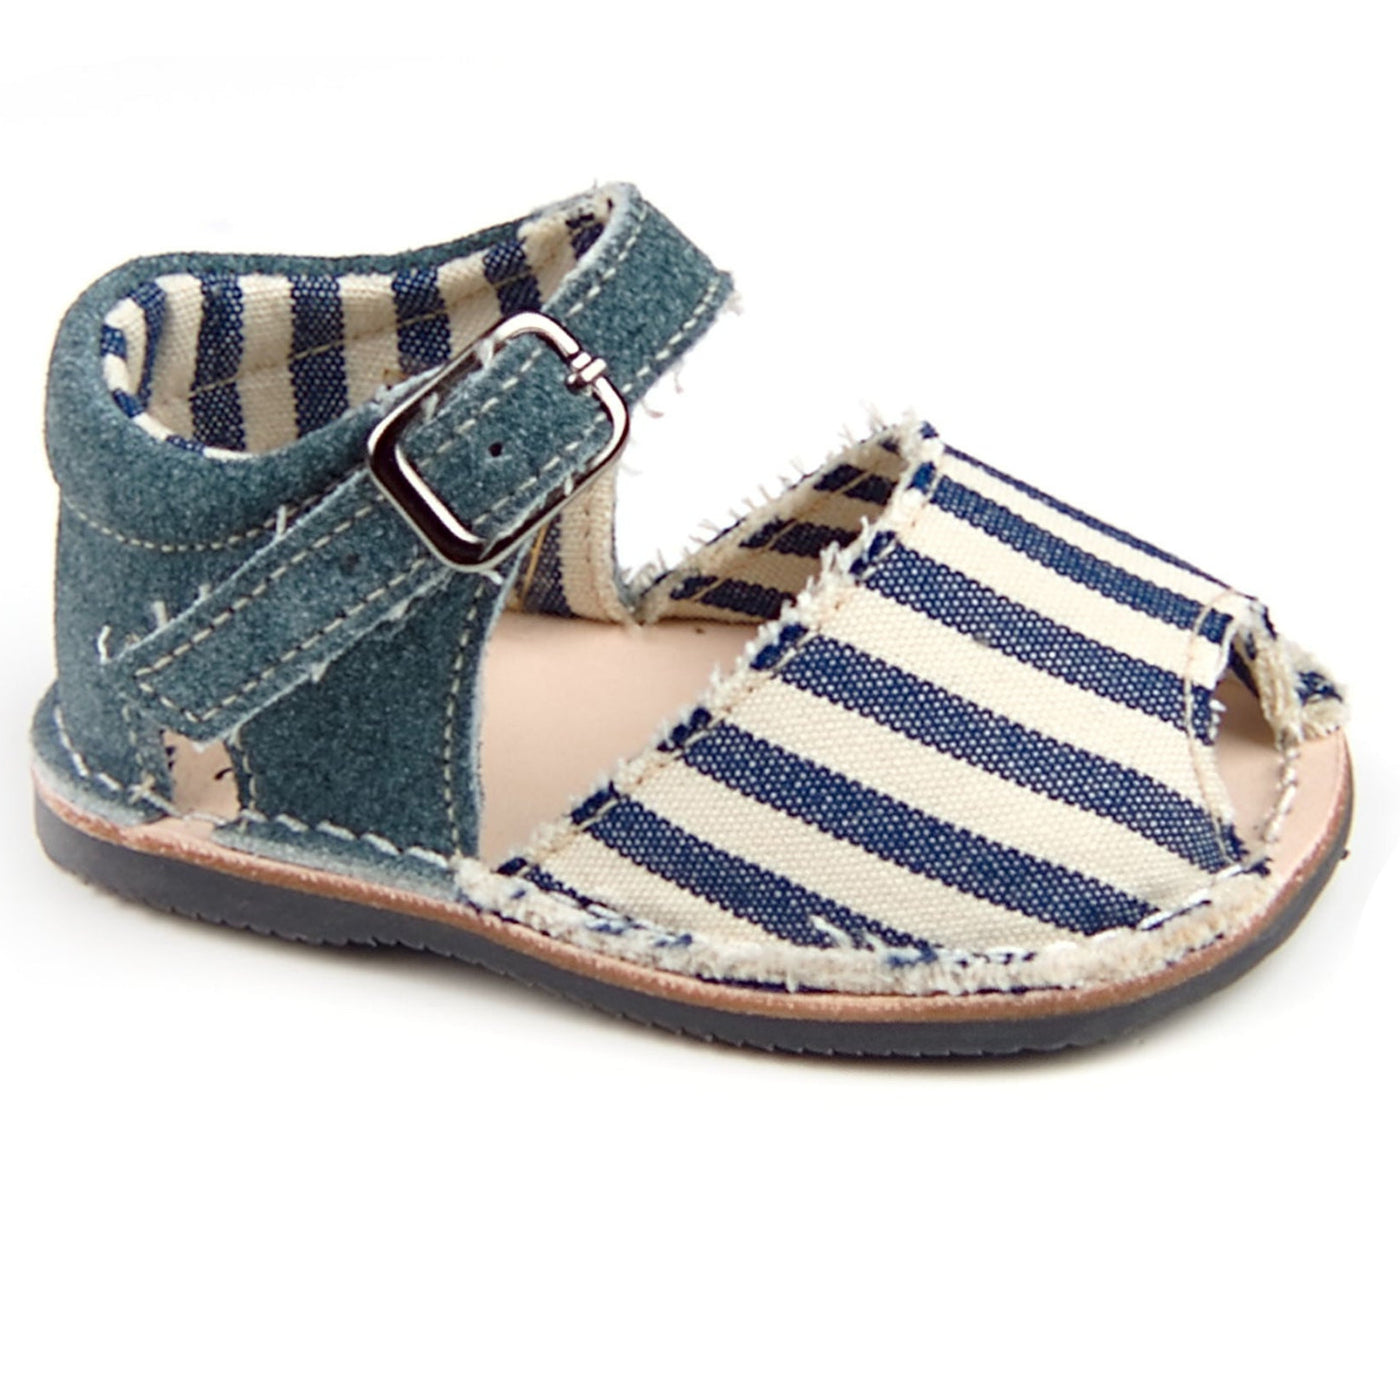 navy blue casual sandals